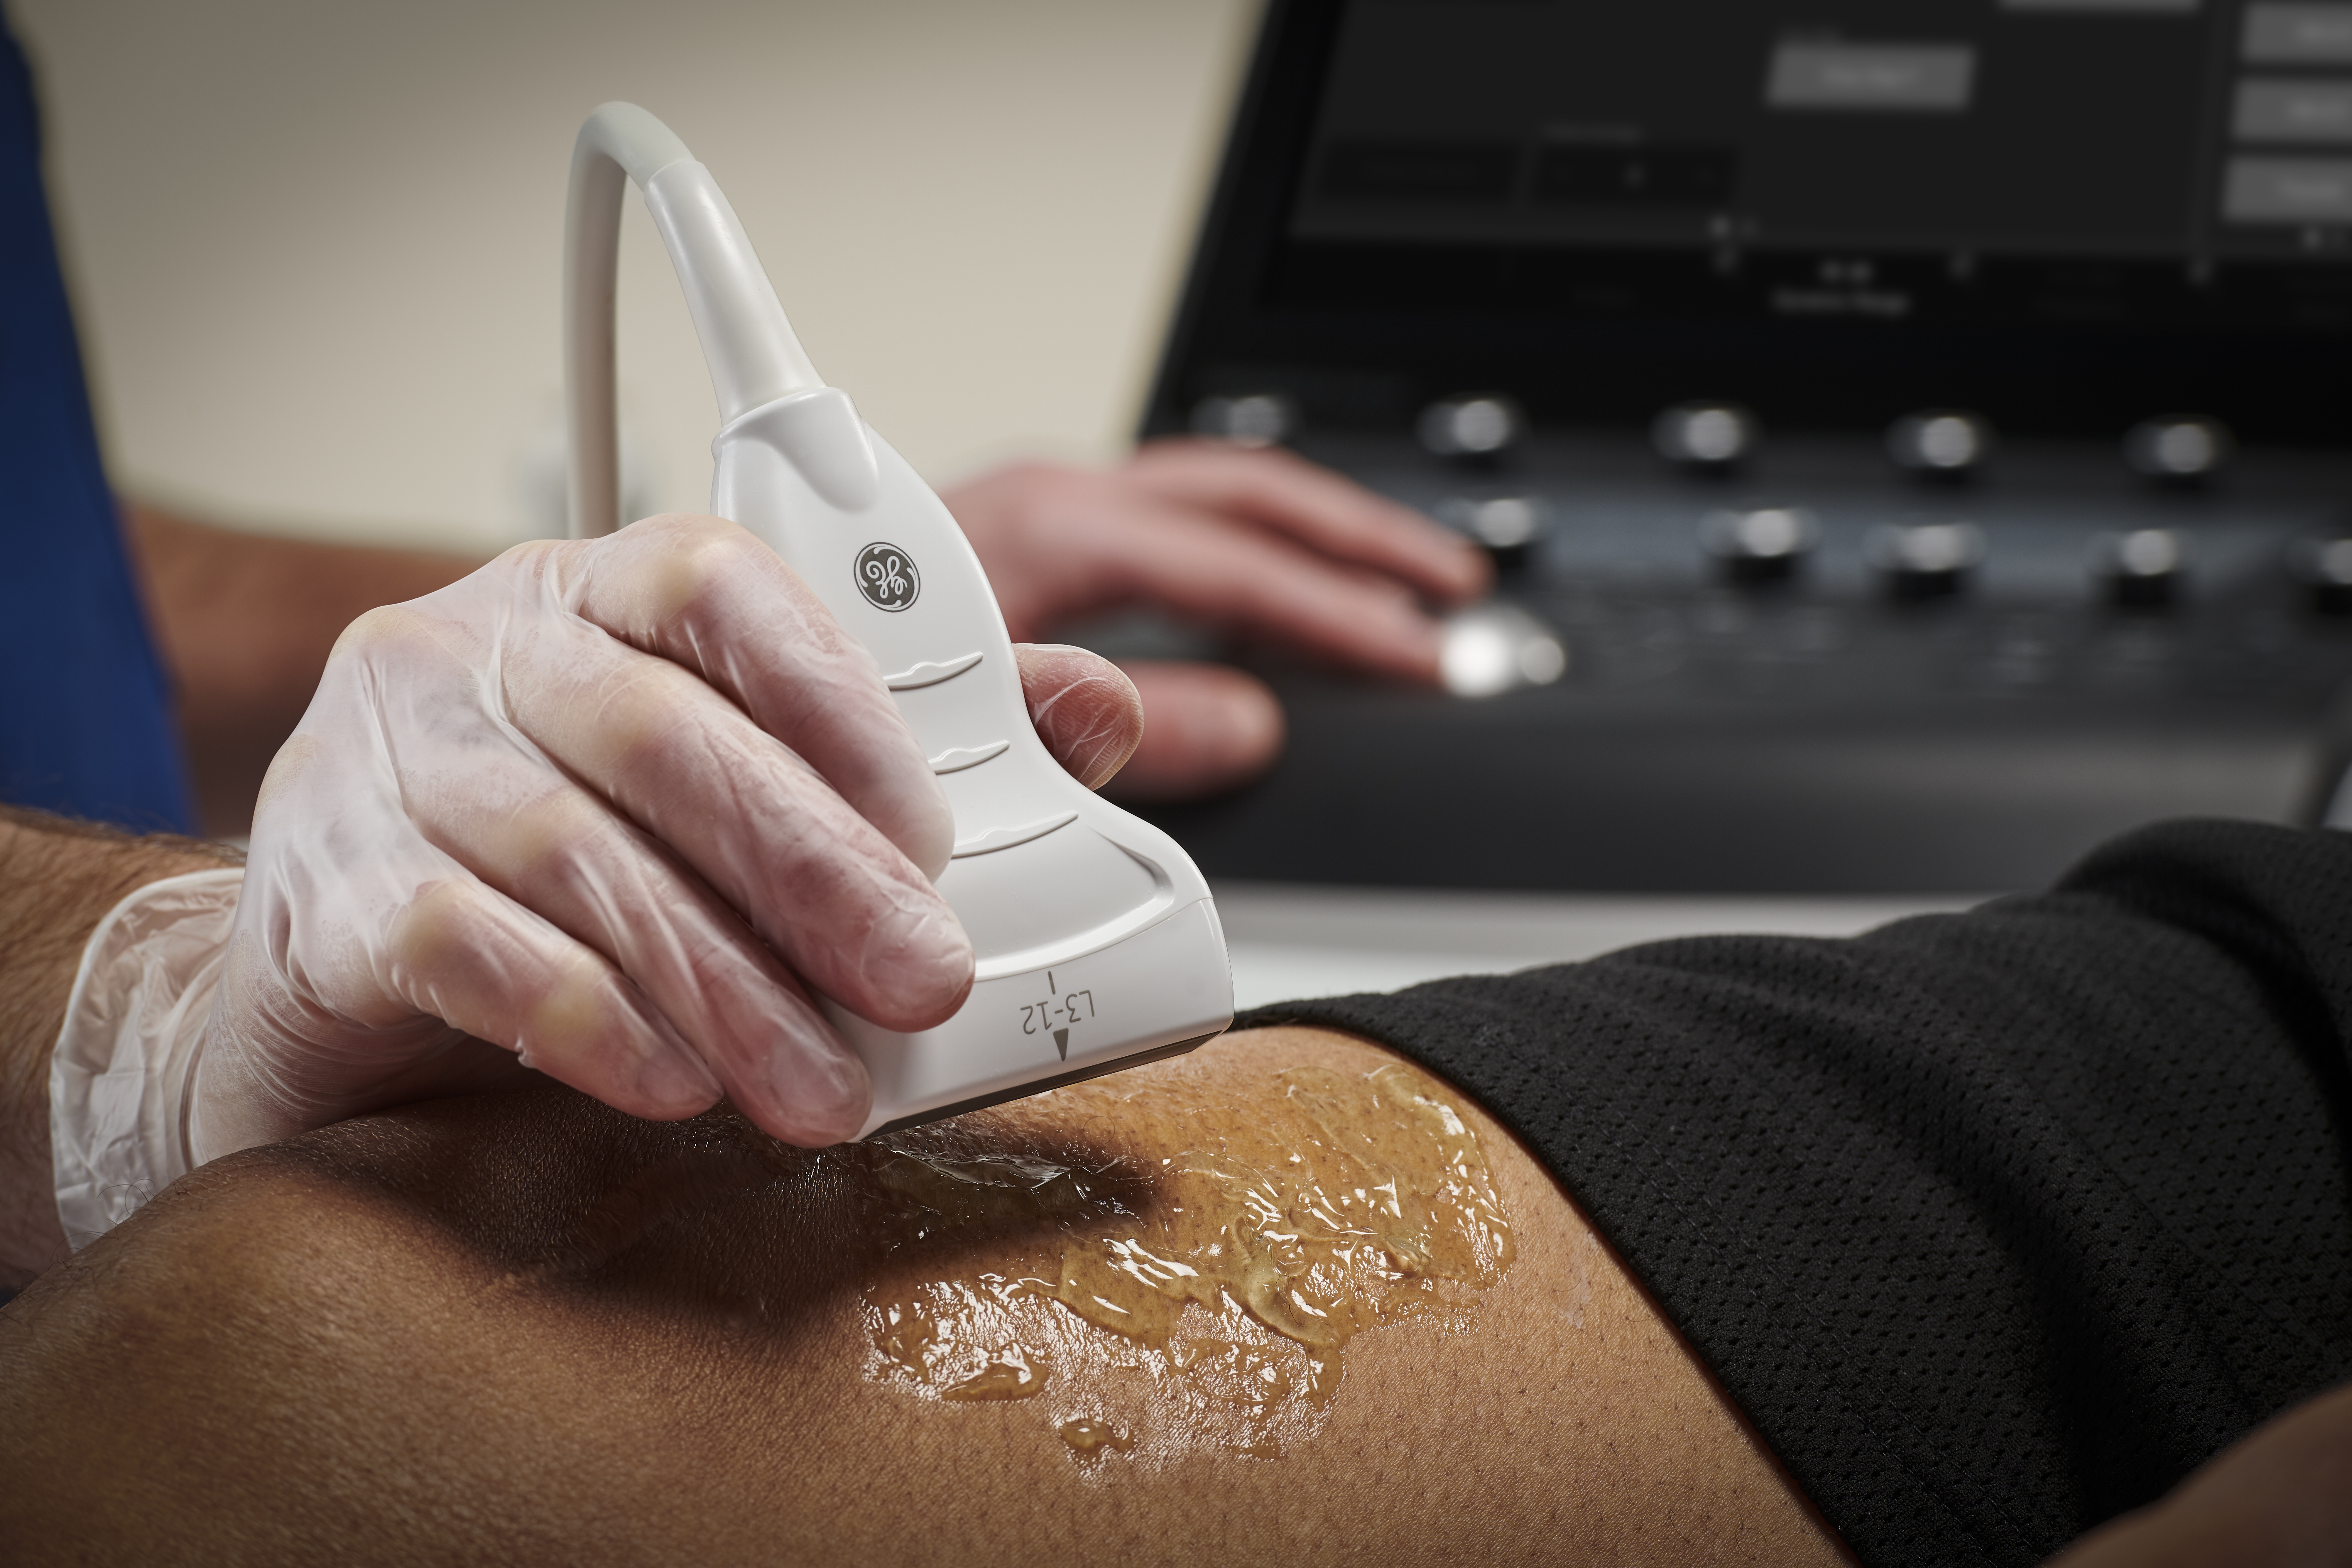 A doctor scans a patient using ultrasound